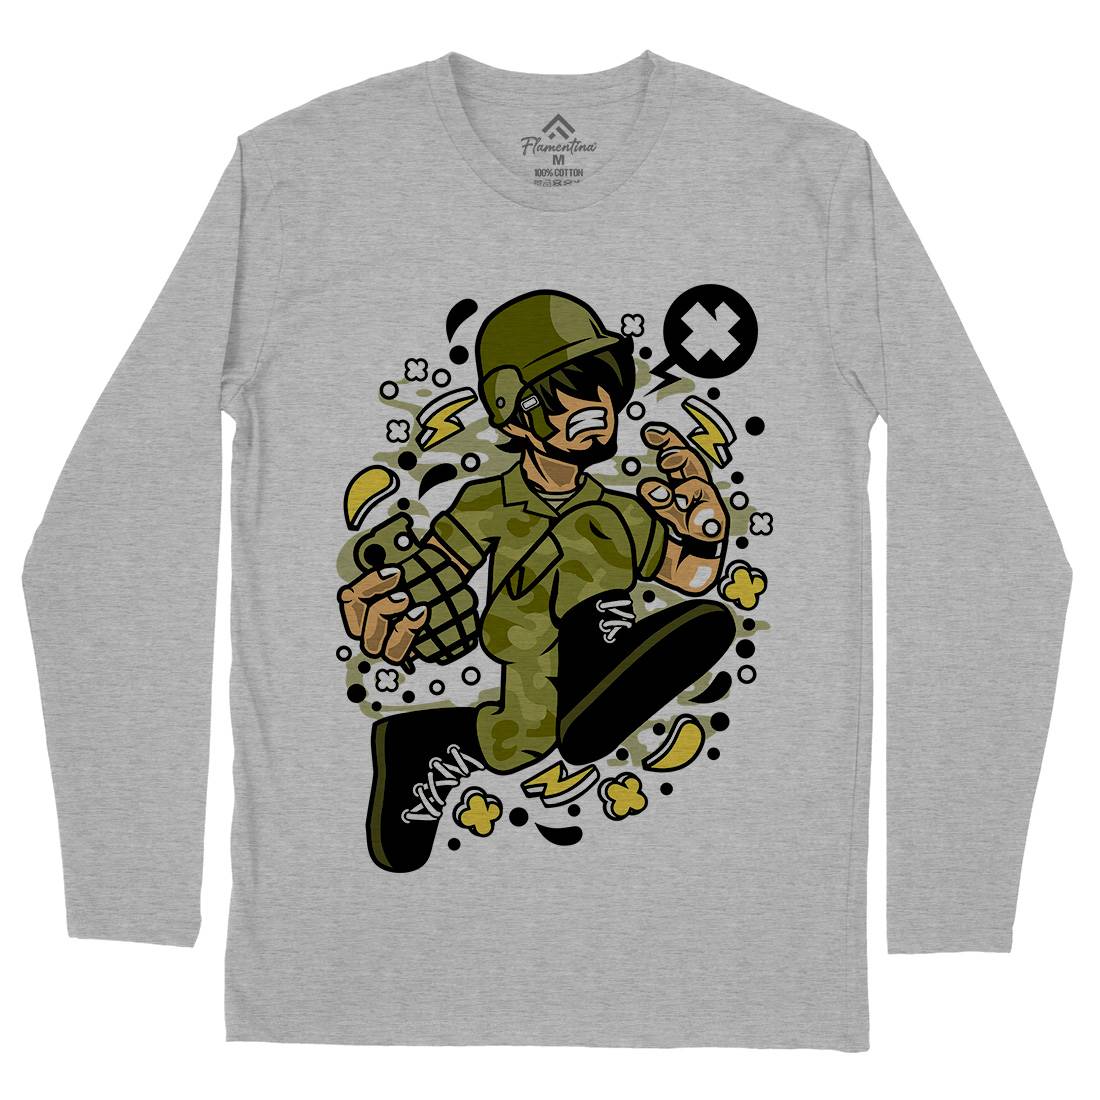 Soldier Running Mens Long Sleeve T-Shirt Army C663